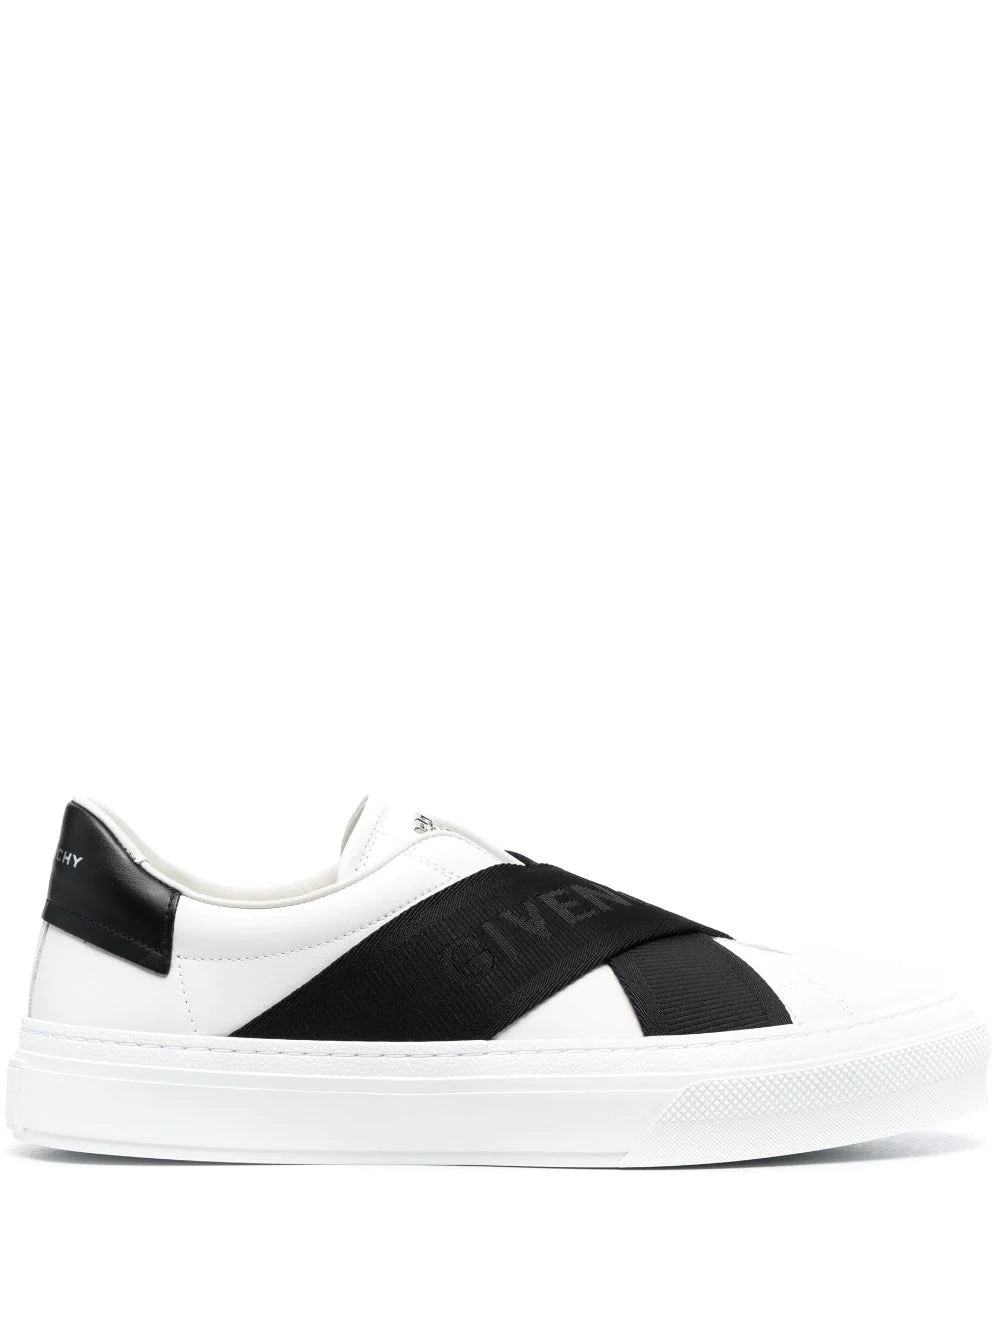 GIVENCHY
Sneakers in pelle bianca